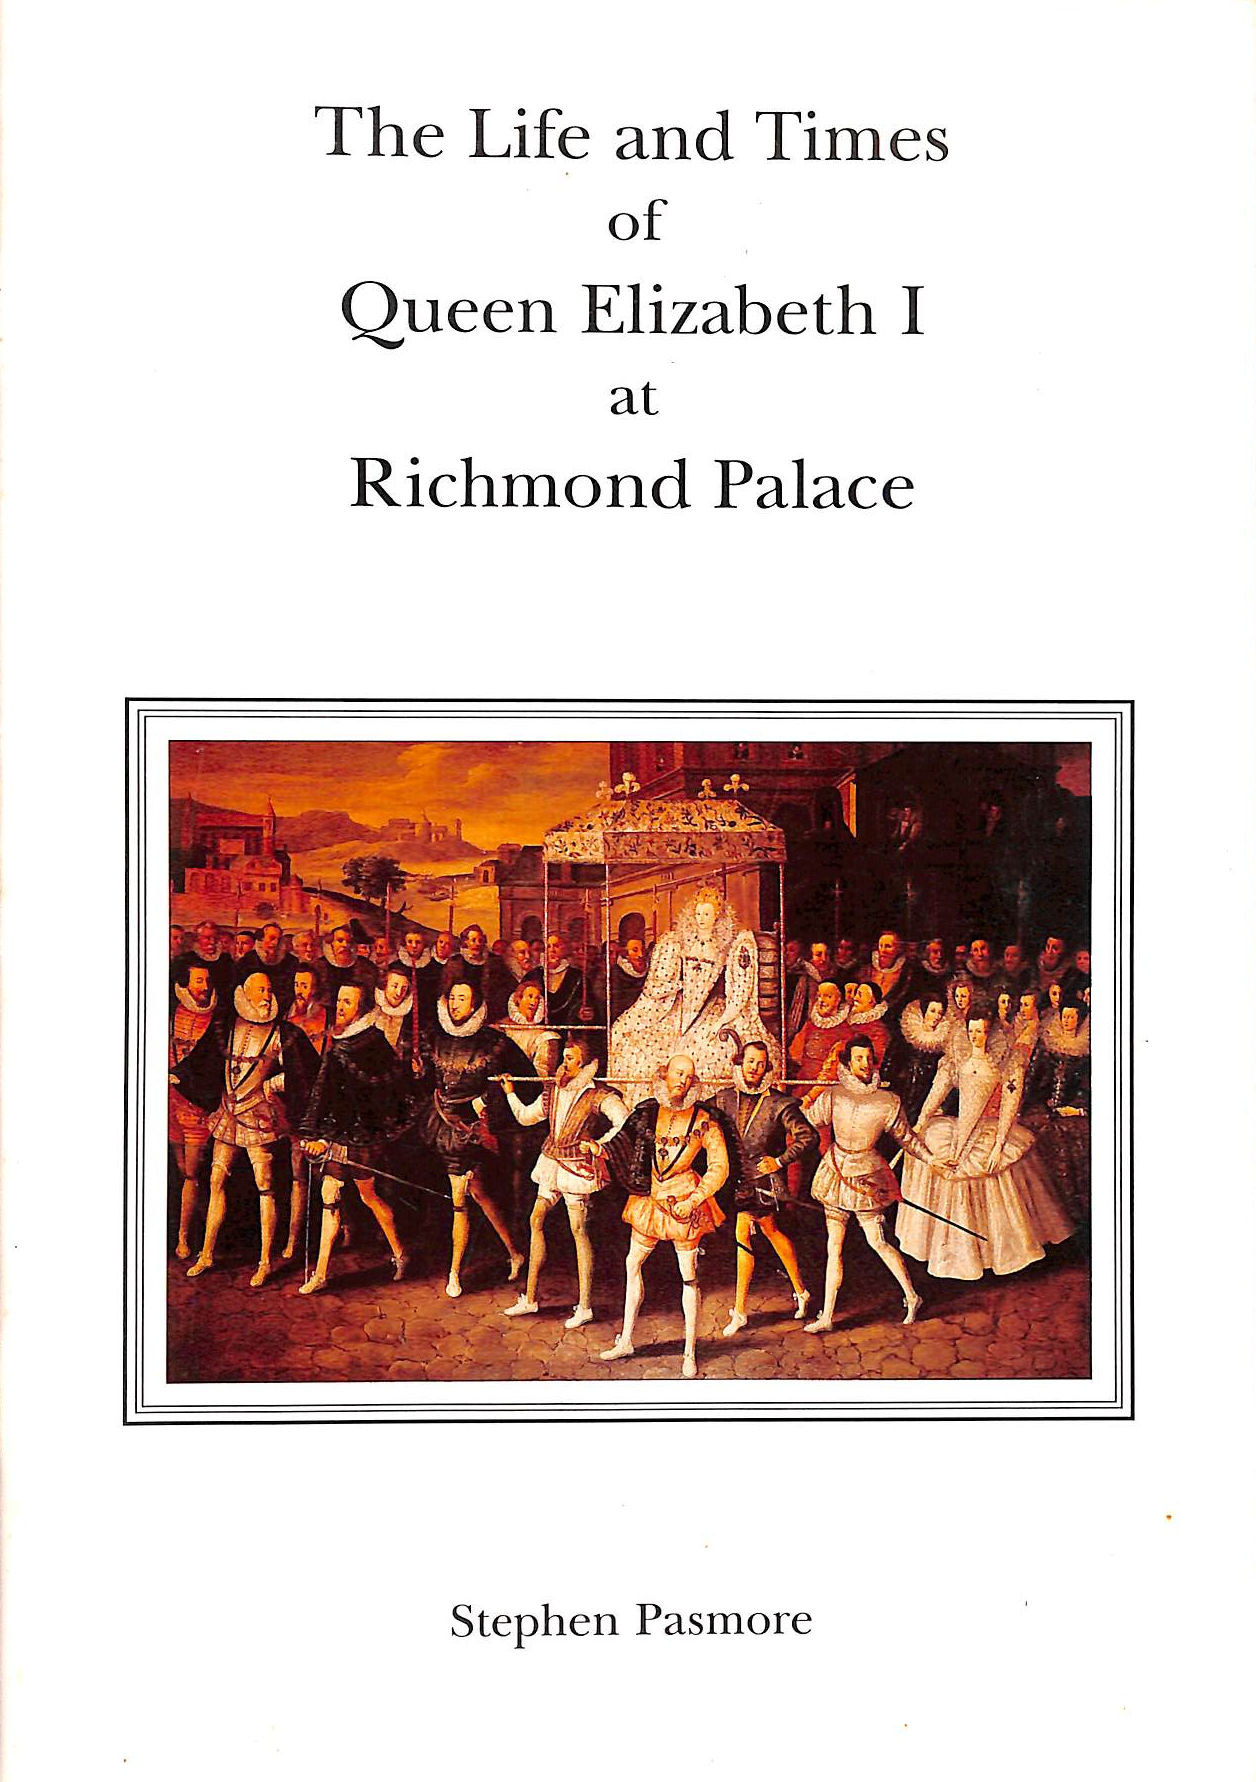 PASMORE, STEPHEN - The Life and Times of Queen Elizabeth I at Richmond Palace: No. 7 (Richmond Local History Society Paper) (Signed copy.)